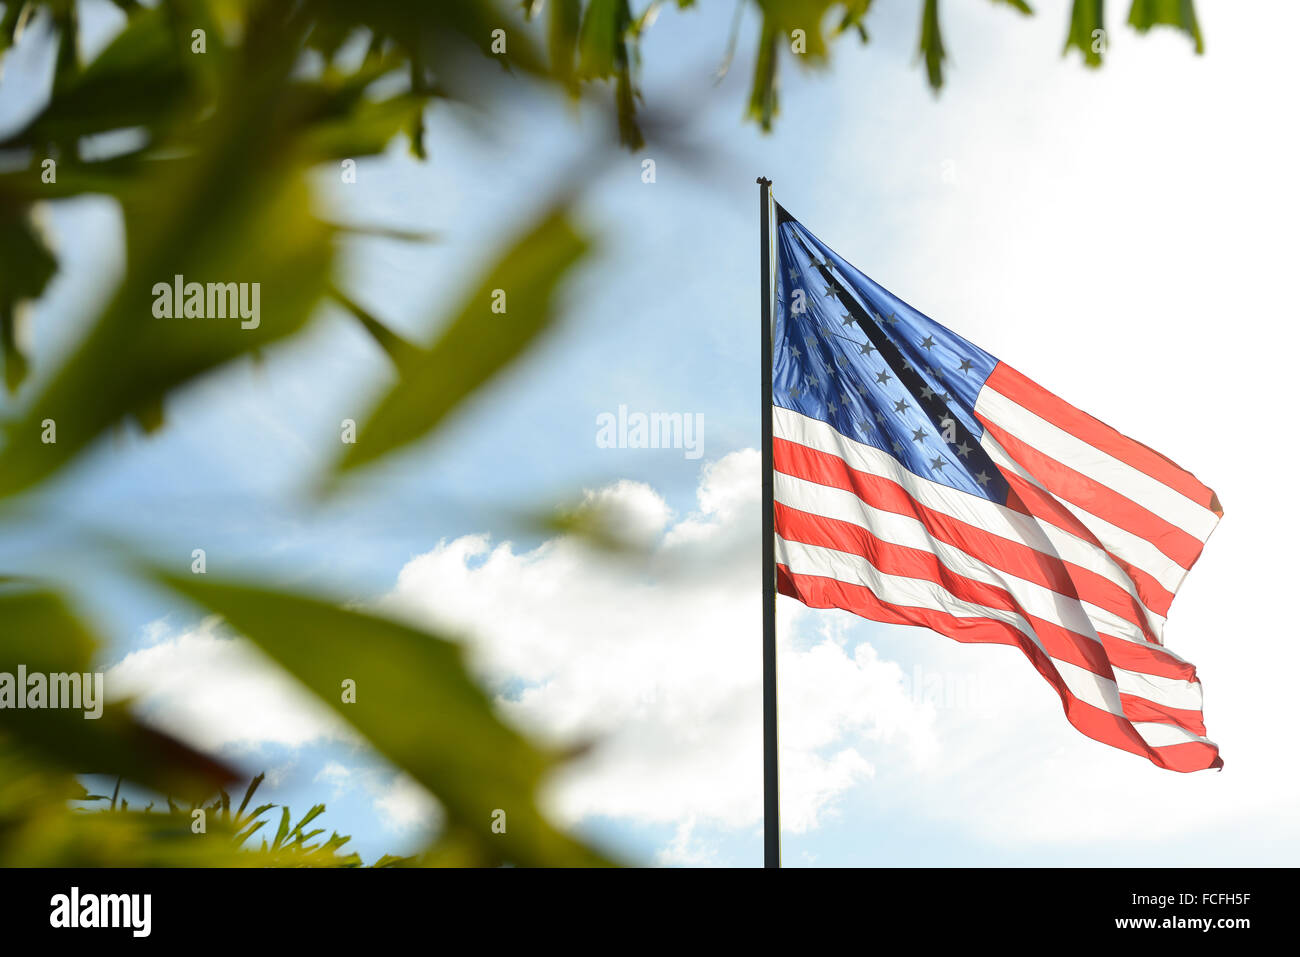 United States of America (USA) flag waving at the boardwalk in the town of Arroyo, Puerto Rico. Caribbean Island. USA territory. Stock Photo